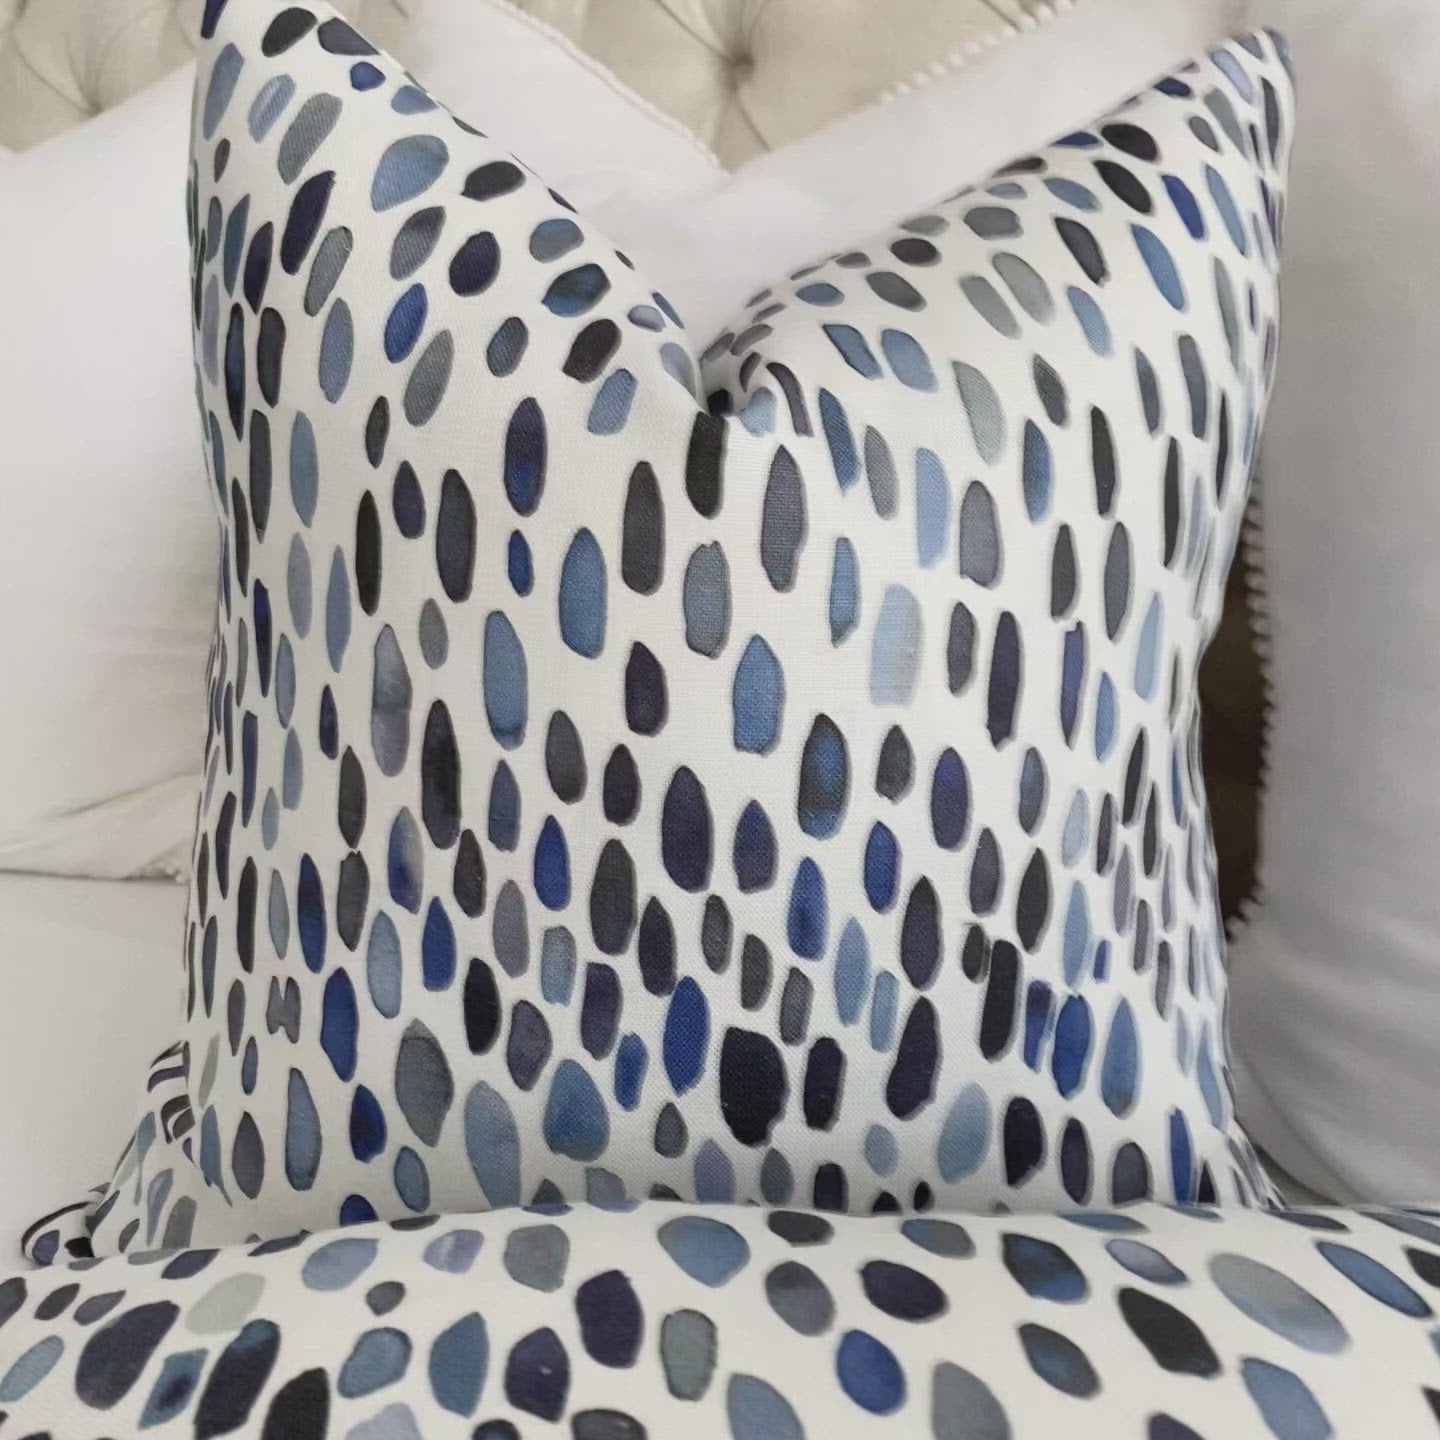 Scalamandre Jamboree Blues Linen Hand Painted Brush Strokes Designer Throw Pillow Cover Product Video